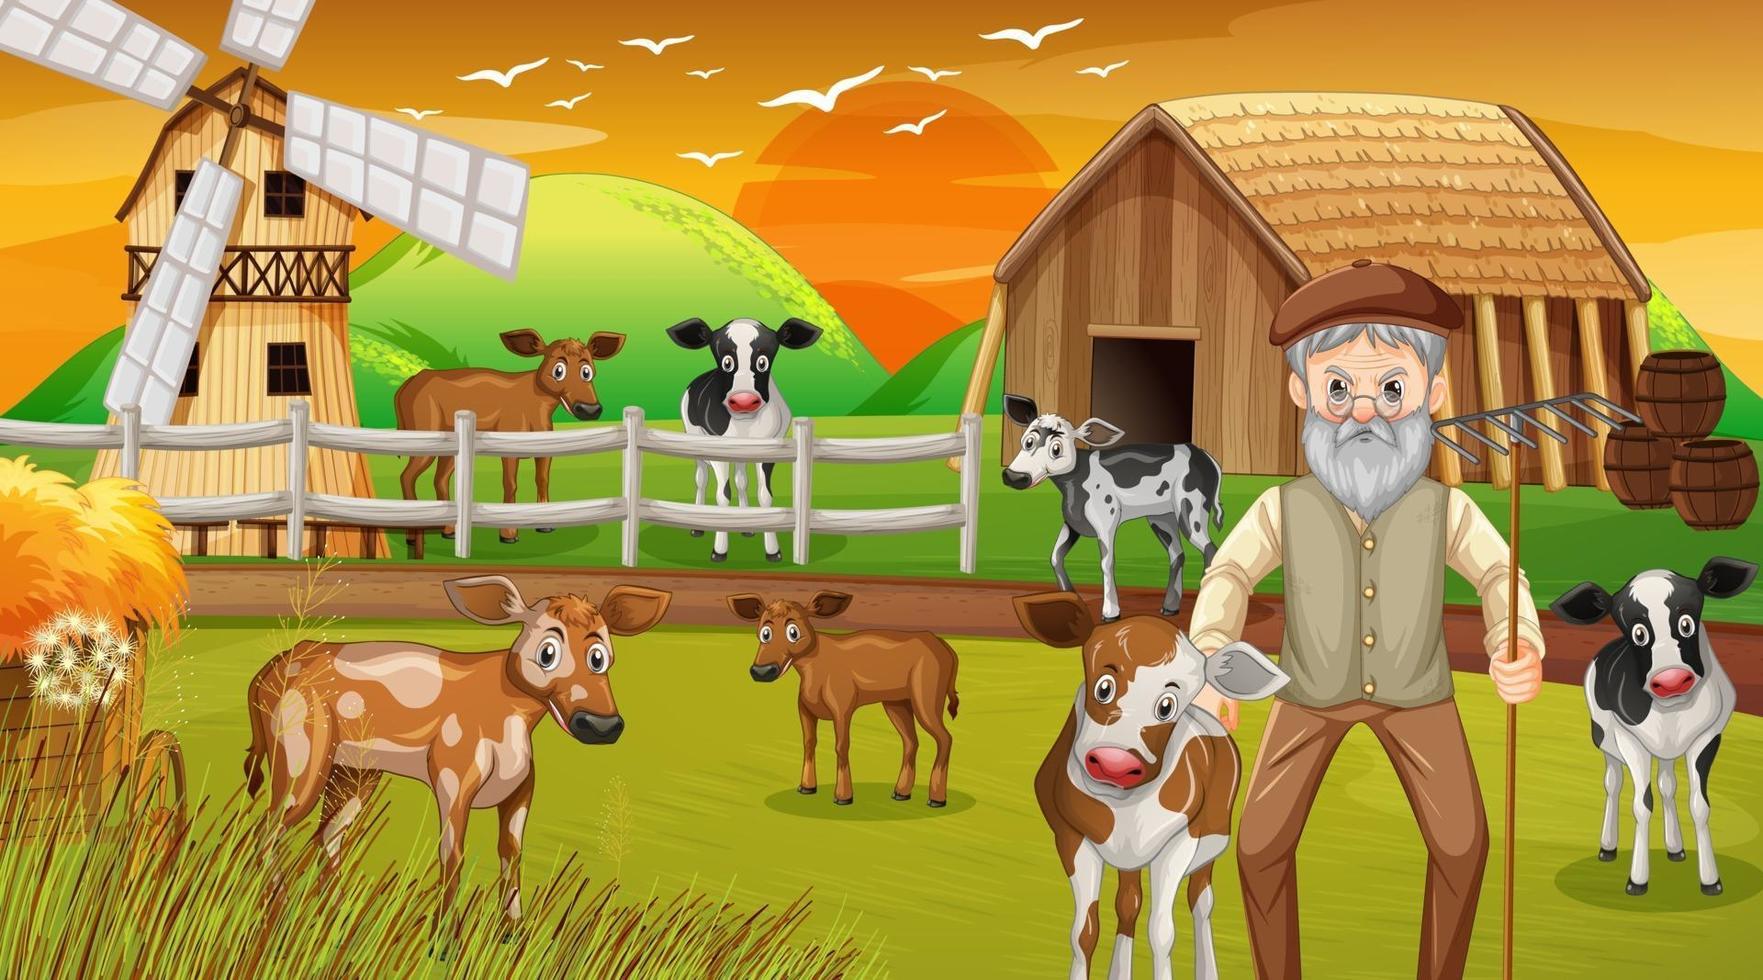 Farm at sunset time scene with old farmer man and farm animals vector